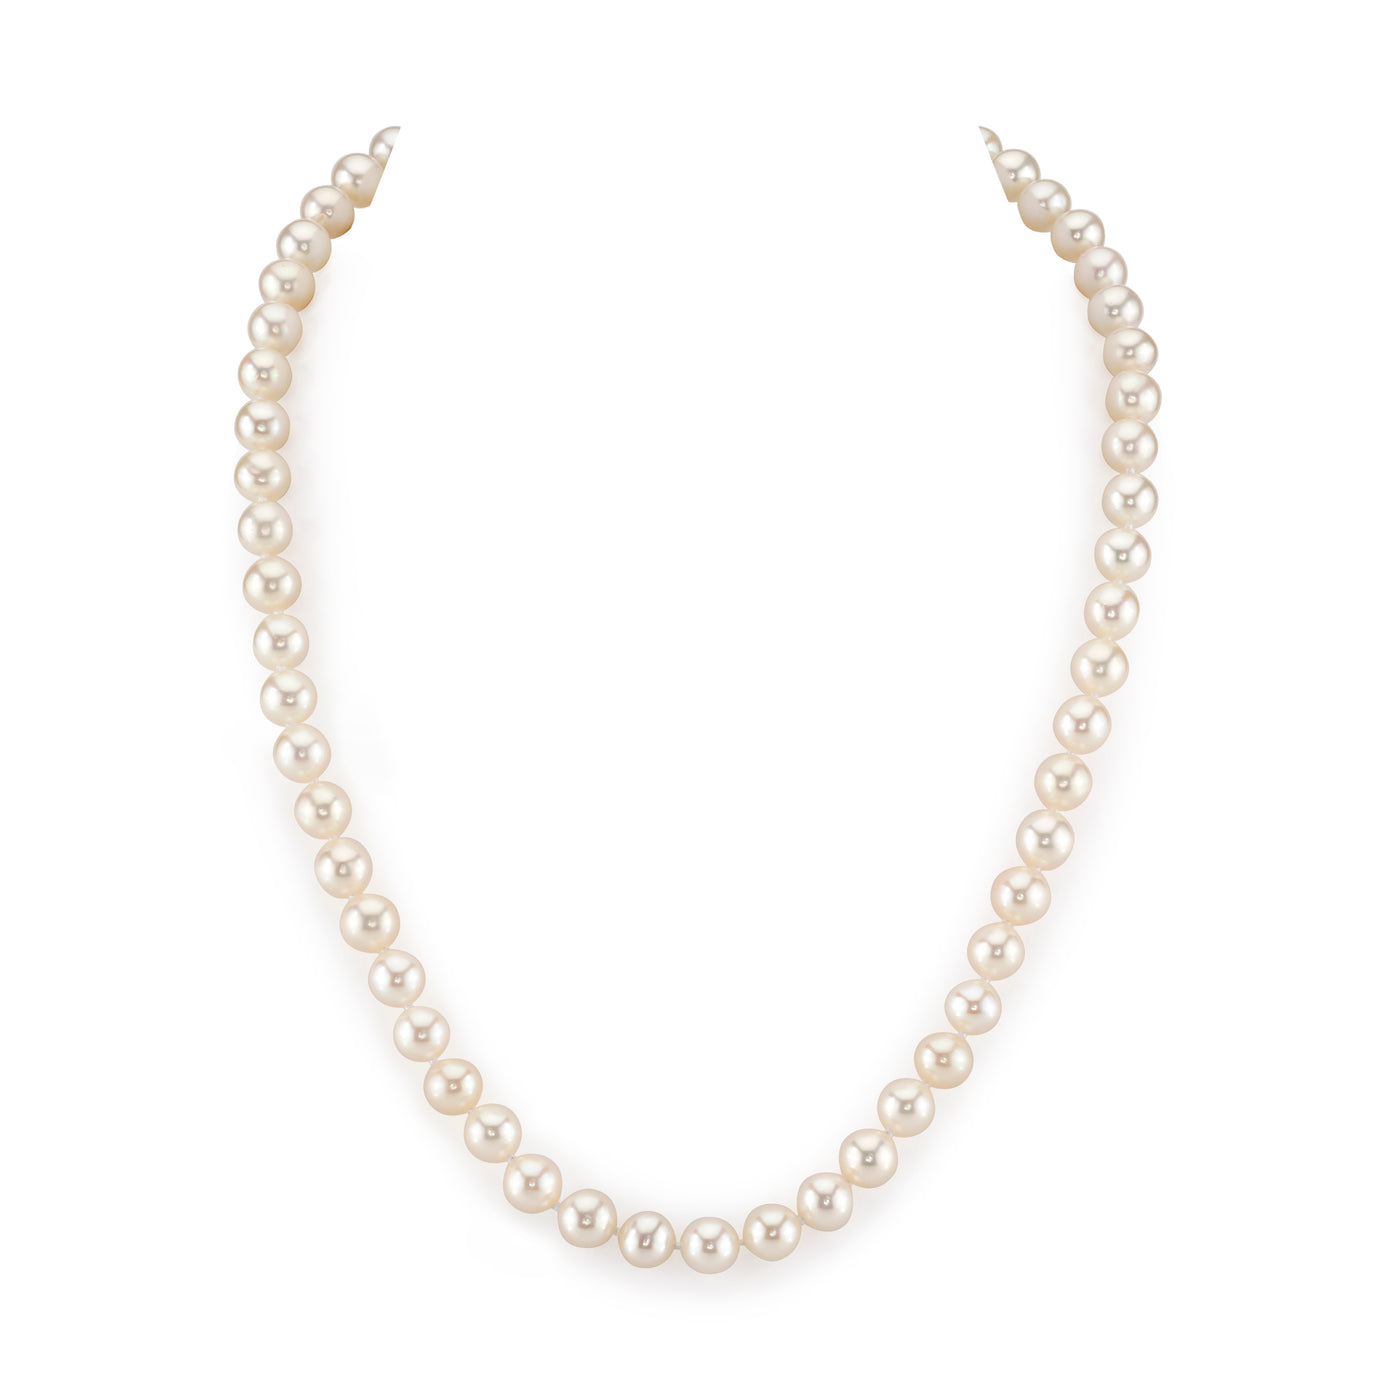 5 Double Strand Pearl Necklaces Perfect For Any Occasion